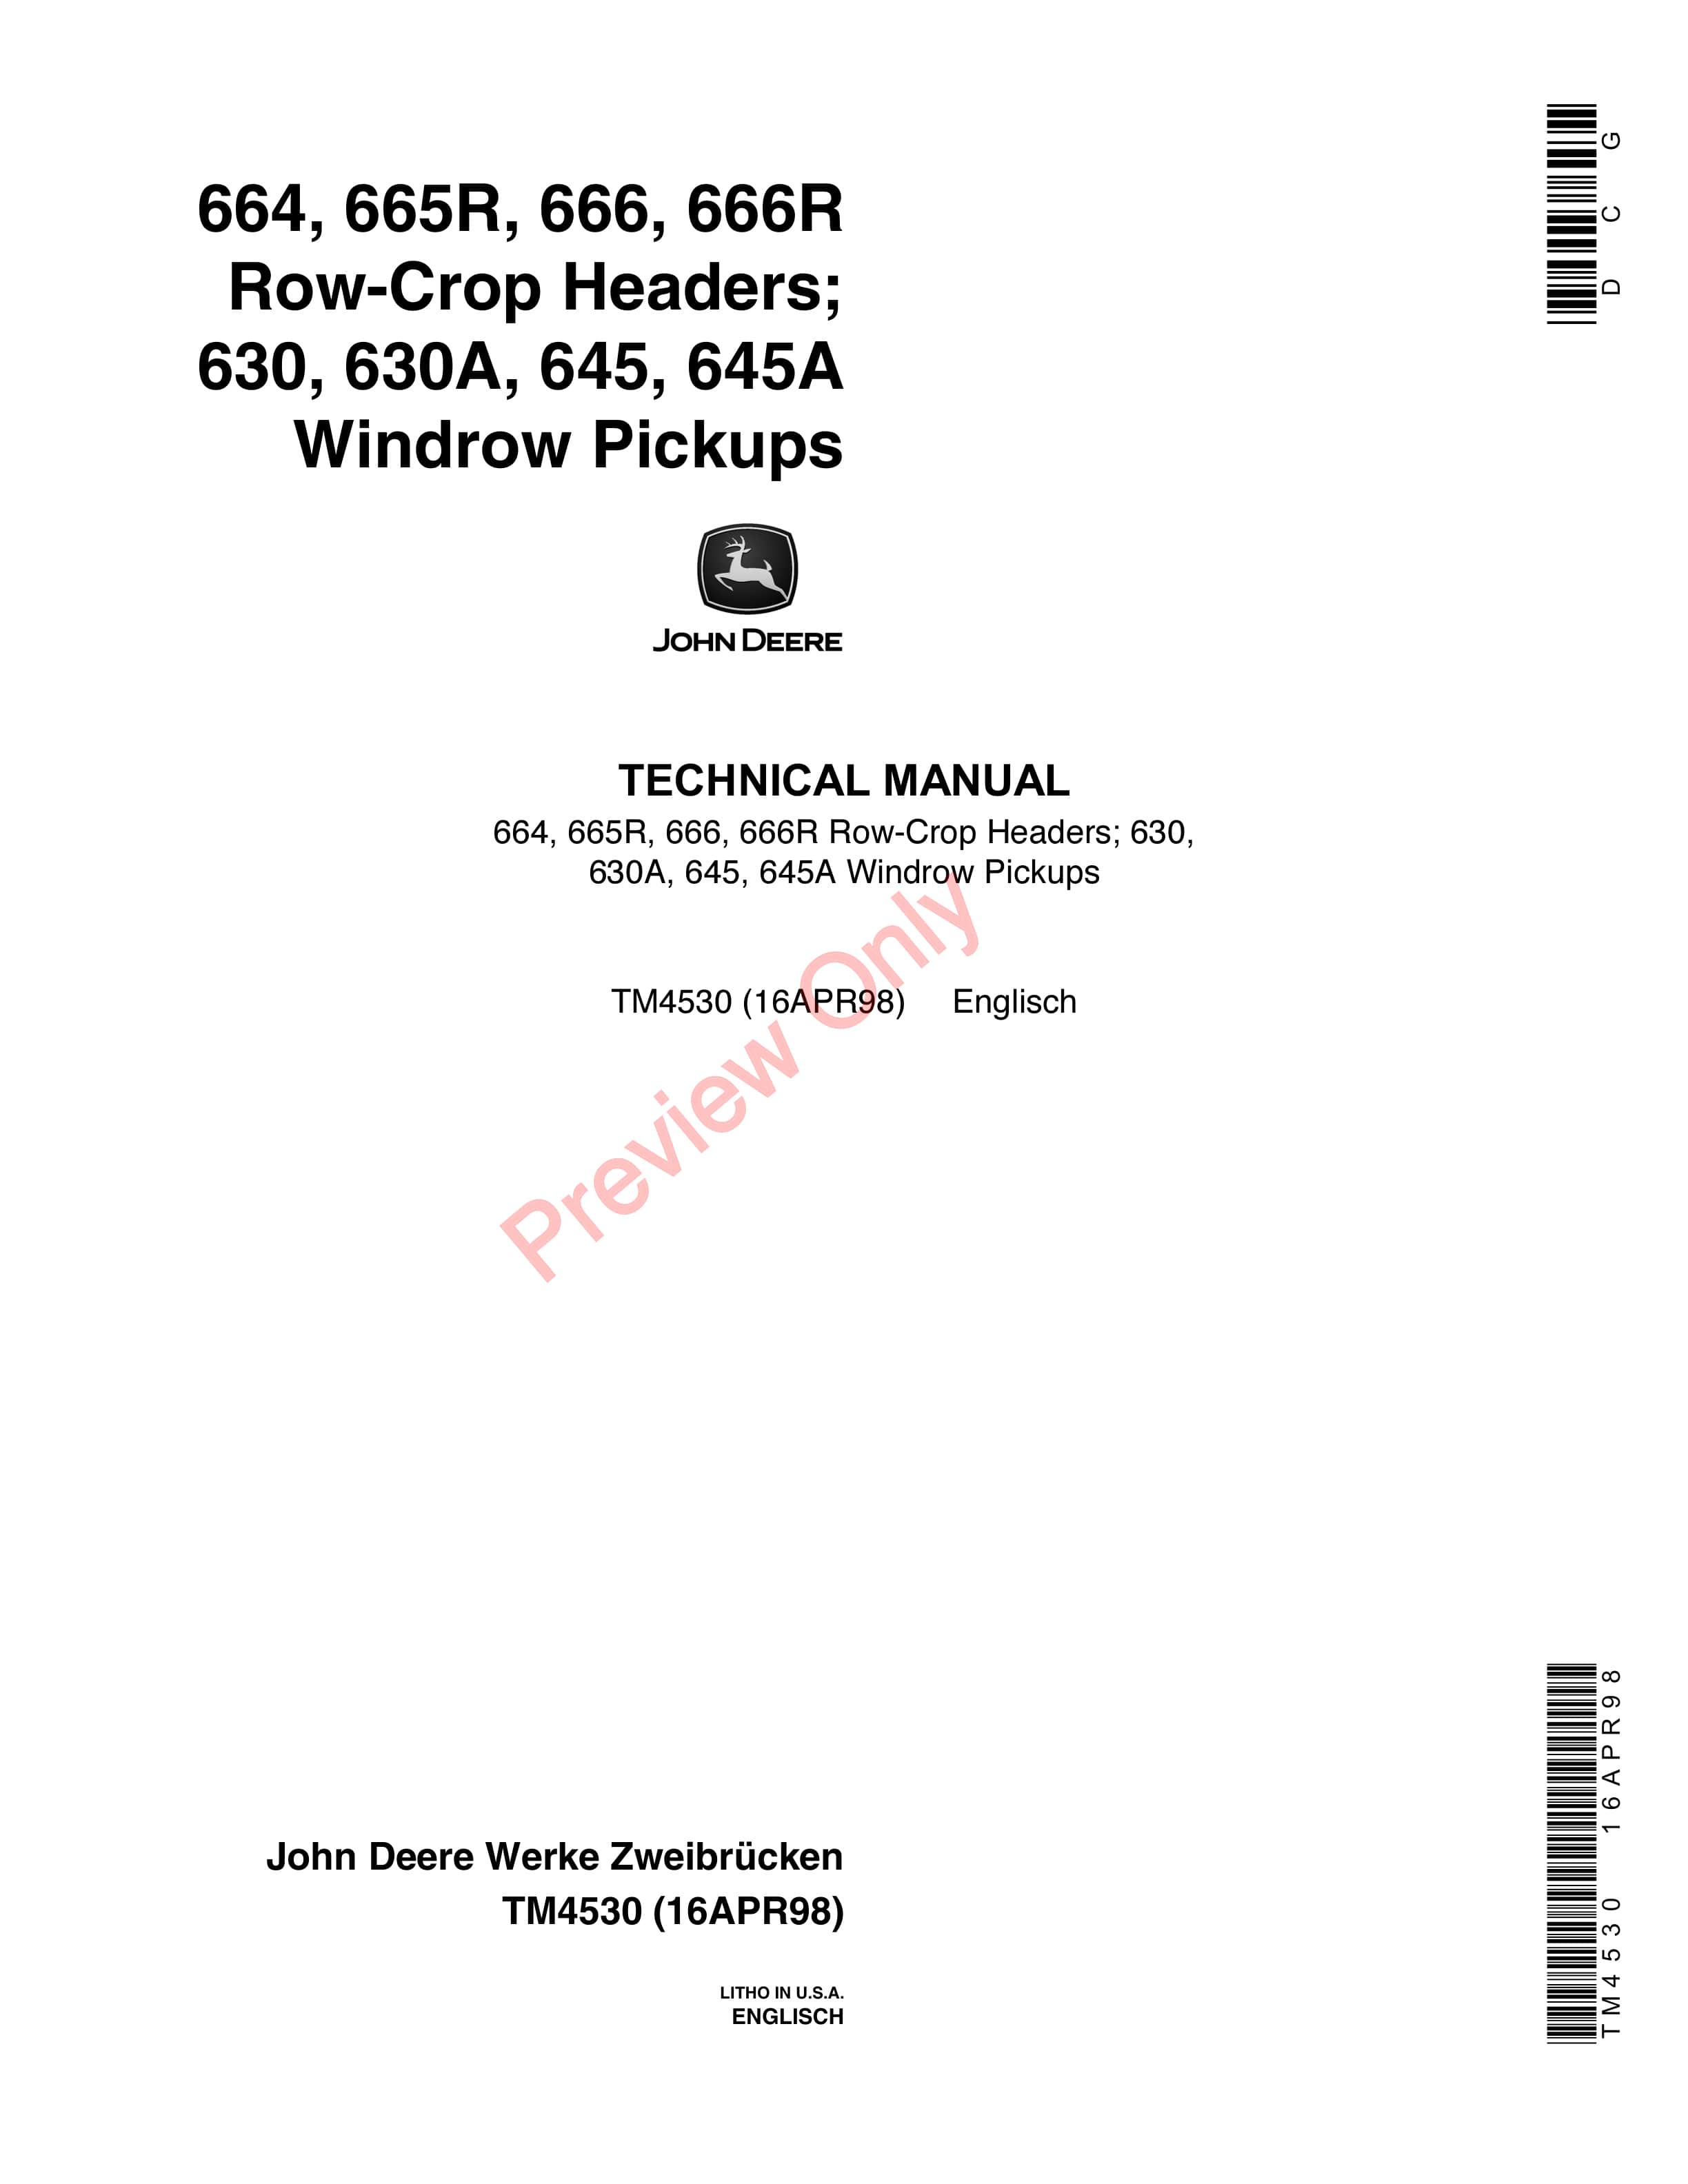 John Deere 664 665R 666 666R Row Crop Headers and 630 630A 645 645A Windrow Pickup Technical Manual TM4530 16APR98 1